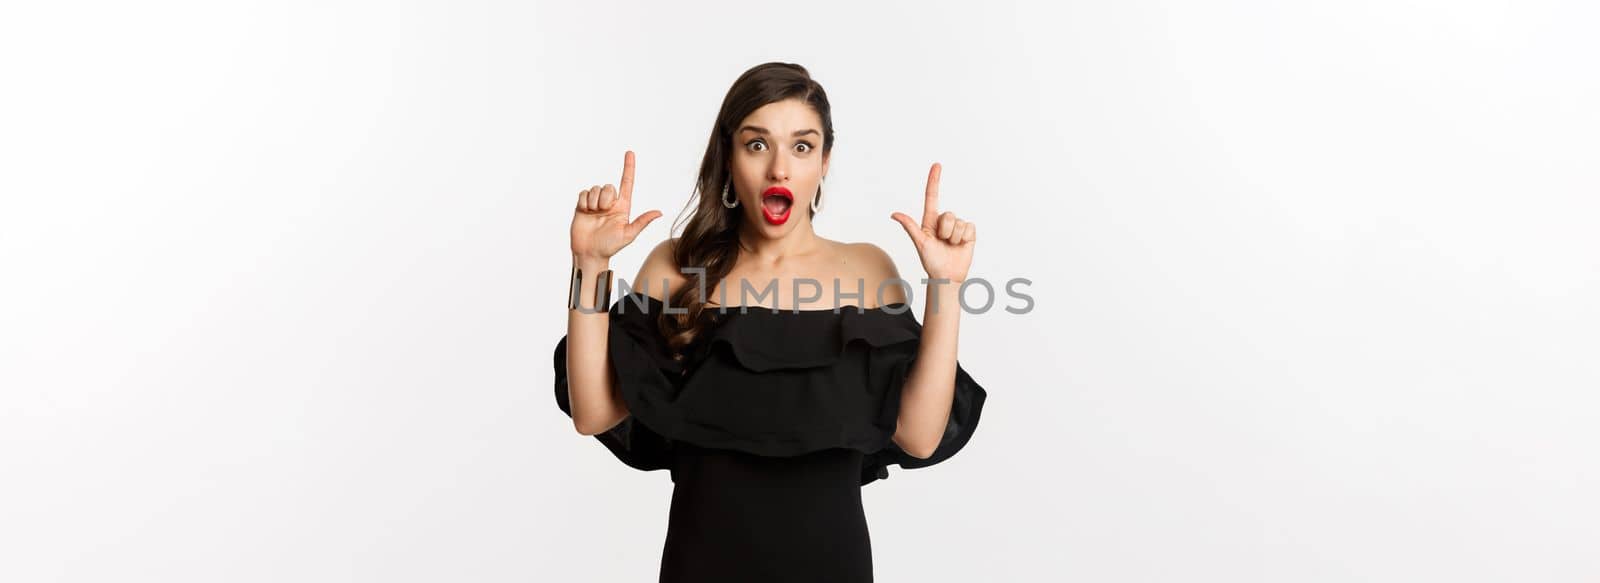 Fashion and beauty. Surprised woman in black dress pointing fingers up, showing banner, standing over white background.